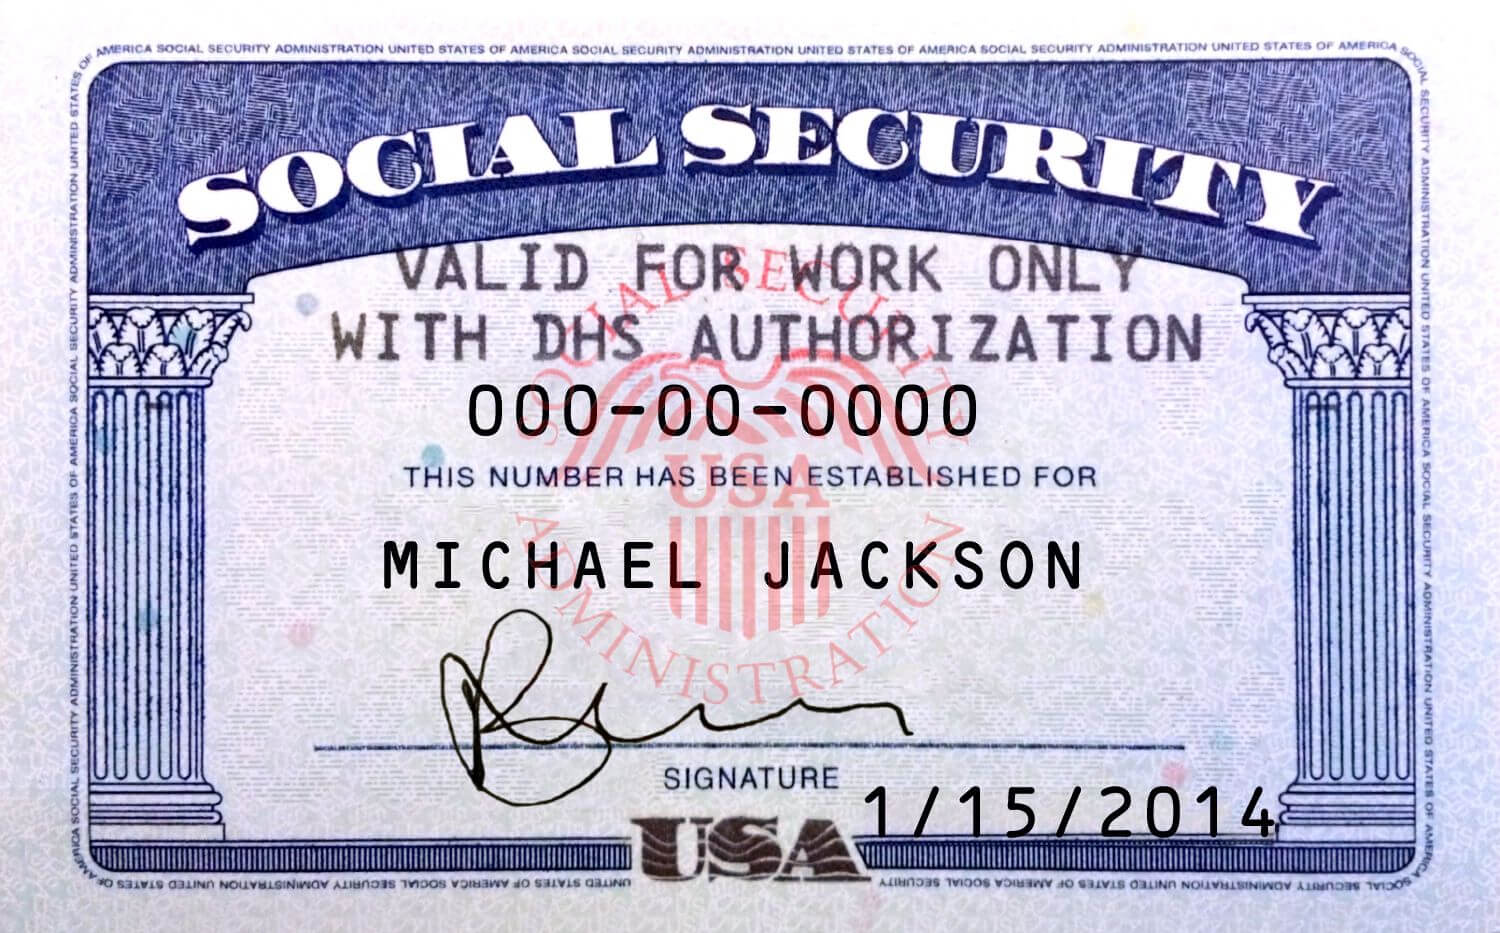 This Is Ssn Card (Usa) Psd (Photoshop) Template. On This Psd With Editable Social Security Card Template